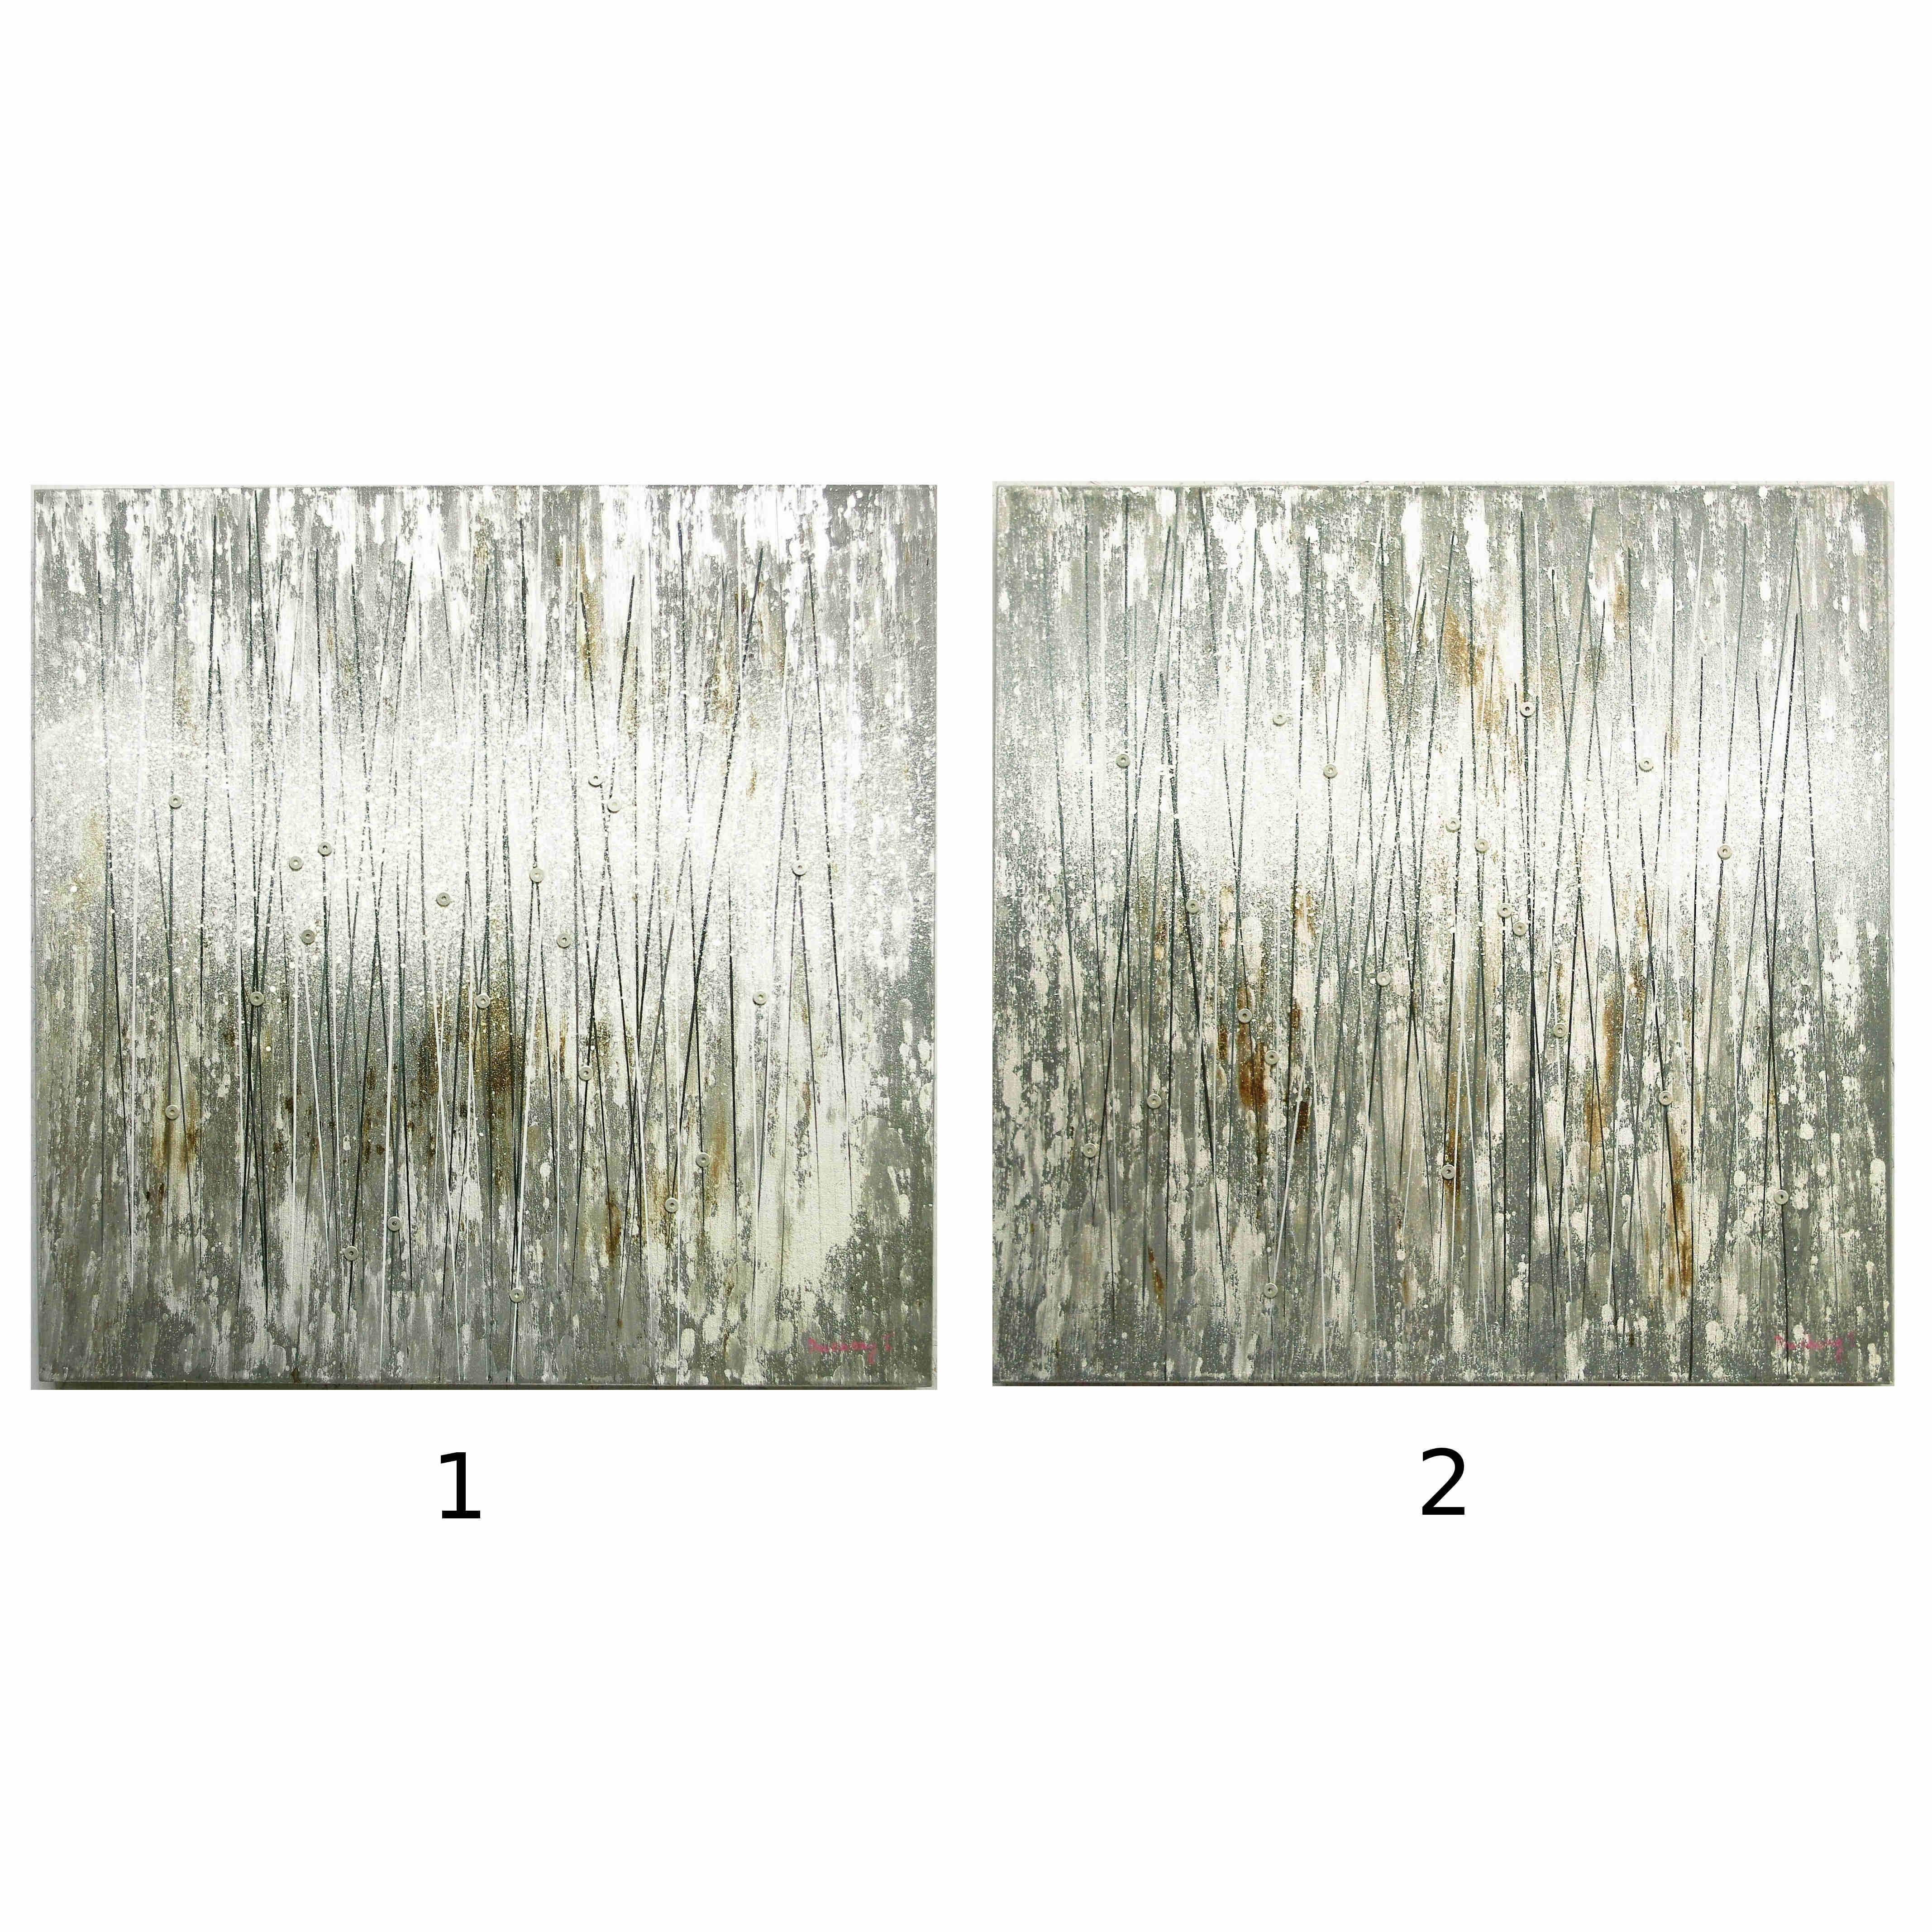 Two contemporary paintings titled Fog by Puchong T / Both paintings are slightly different as shown on the images
Height: 28 inches / Width: 28 inches / Depth: 2 inches
2 available in Palm Springs currently ON FINAL CLEARANCE SALE for $499